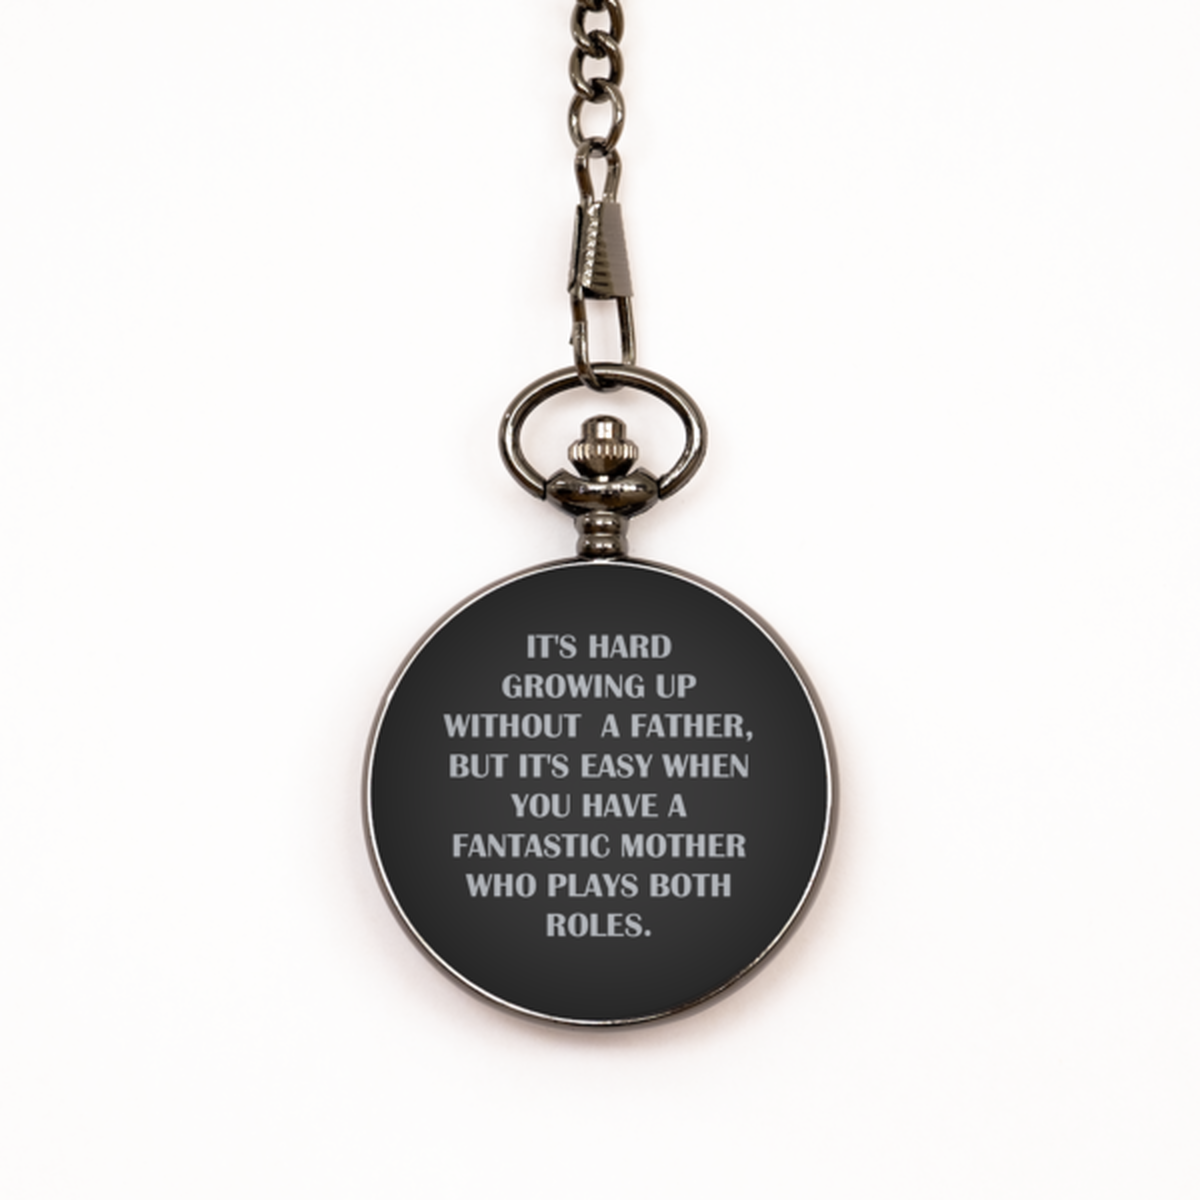 To My Single Mom Black Pocket Watch, Who Plays Both Roles, Mothers Day Gifts For Single Mom From Friends, Birthday Gifts For Women